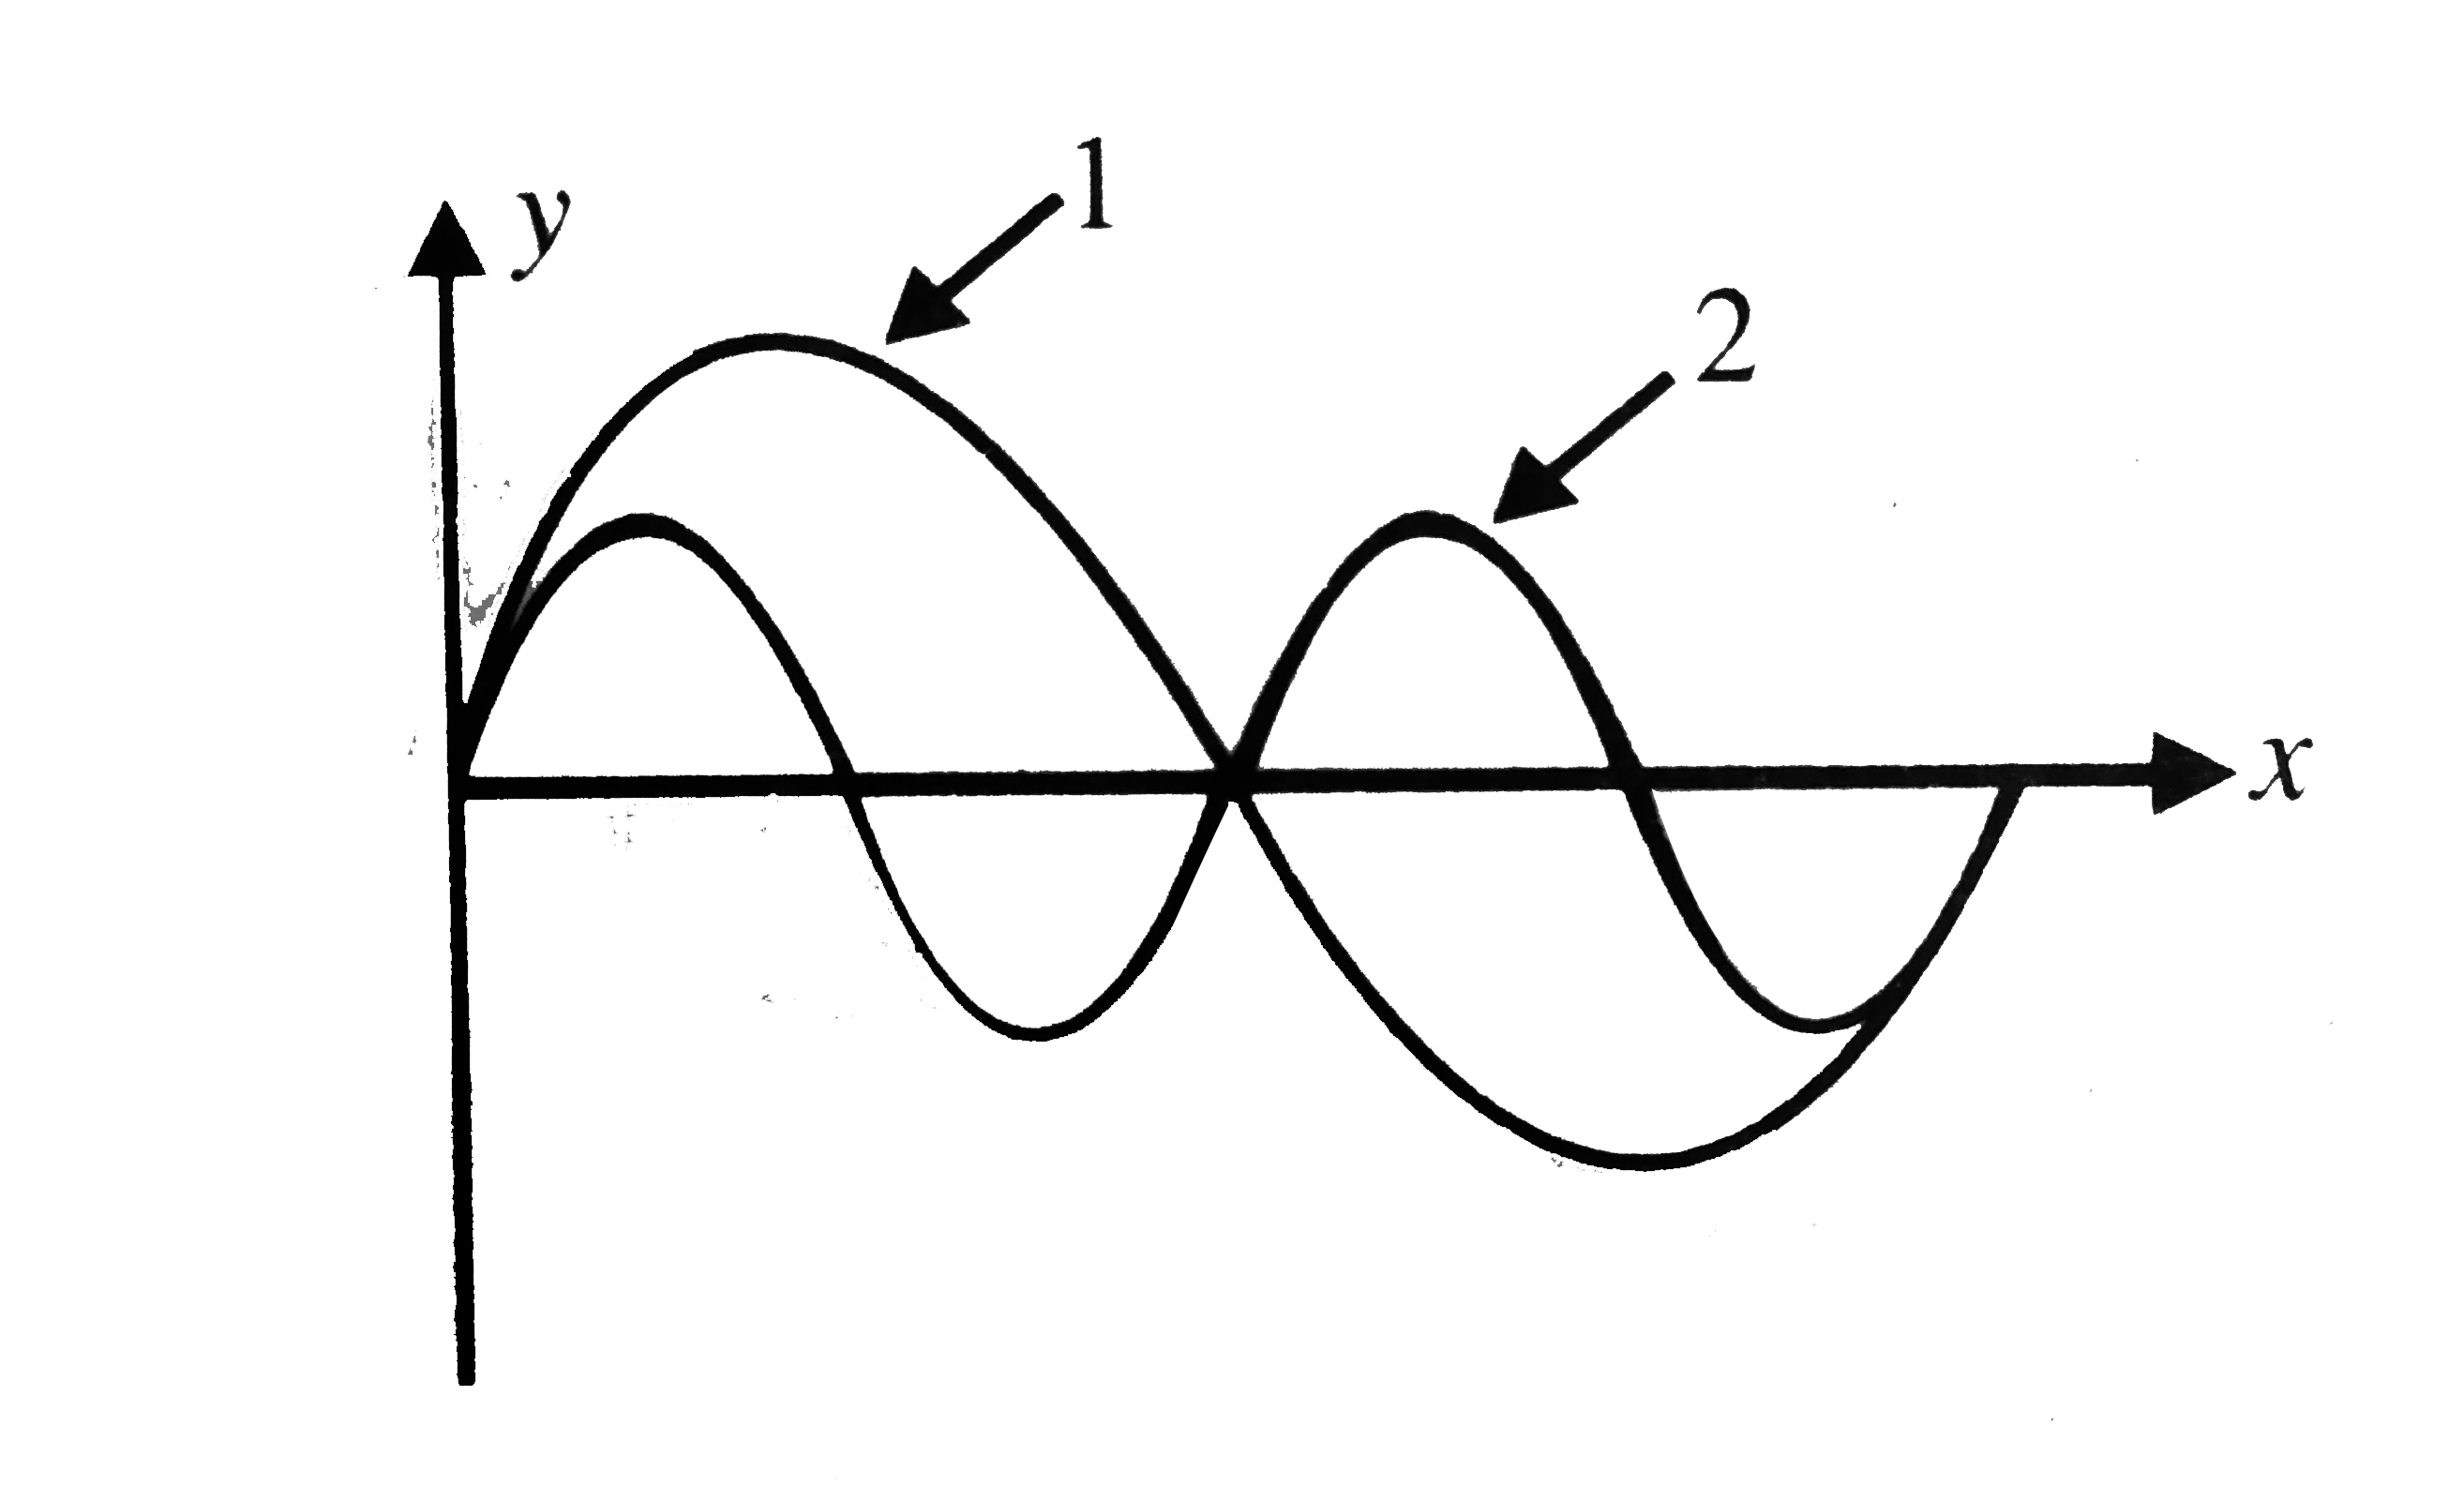 The      shows two snapshots, each of a wave travelling along a particular string. The phase for the waves are given by (a) 4x-8t (b) 8x-16t. Which phase corresponds to which waves in